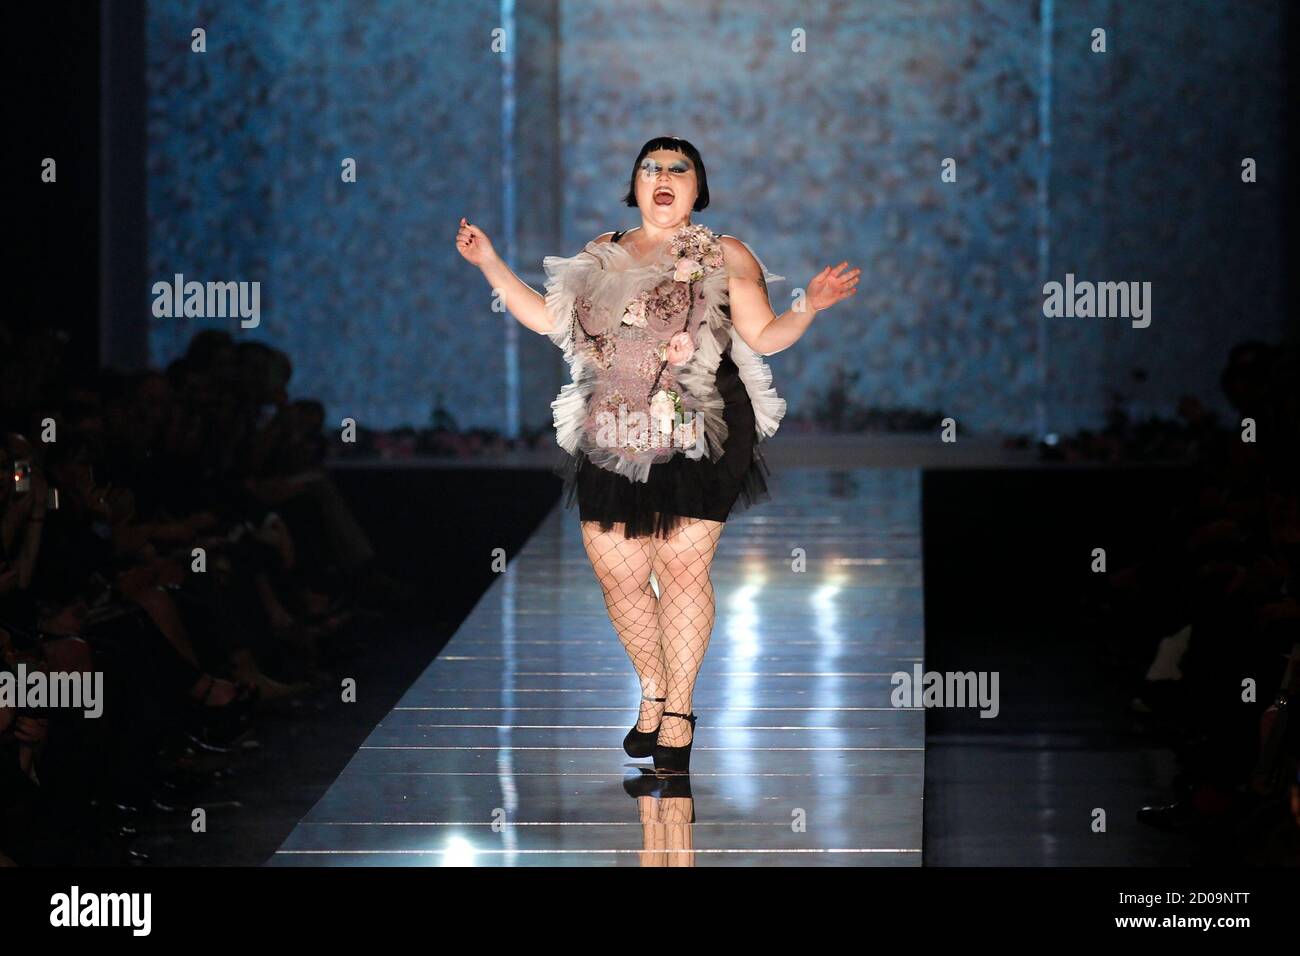 Singer Beth Ditto of U.S. band Gossip presents a creation French designer Jean-Paul Gaultier as part of his Spring/Summer 2011 fashion show in Paris October 2, 2010. REUTERS/Benoit Tessier (FRANCE -